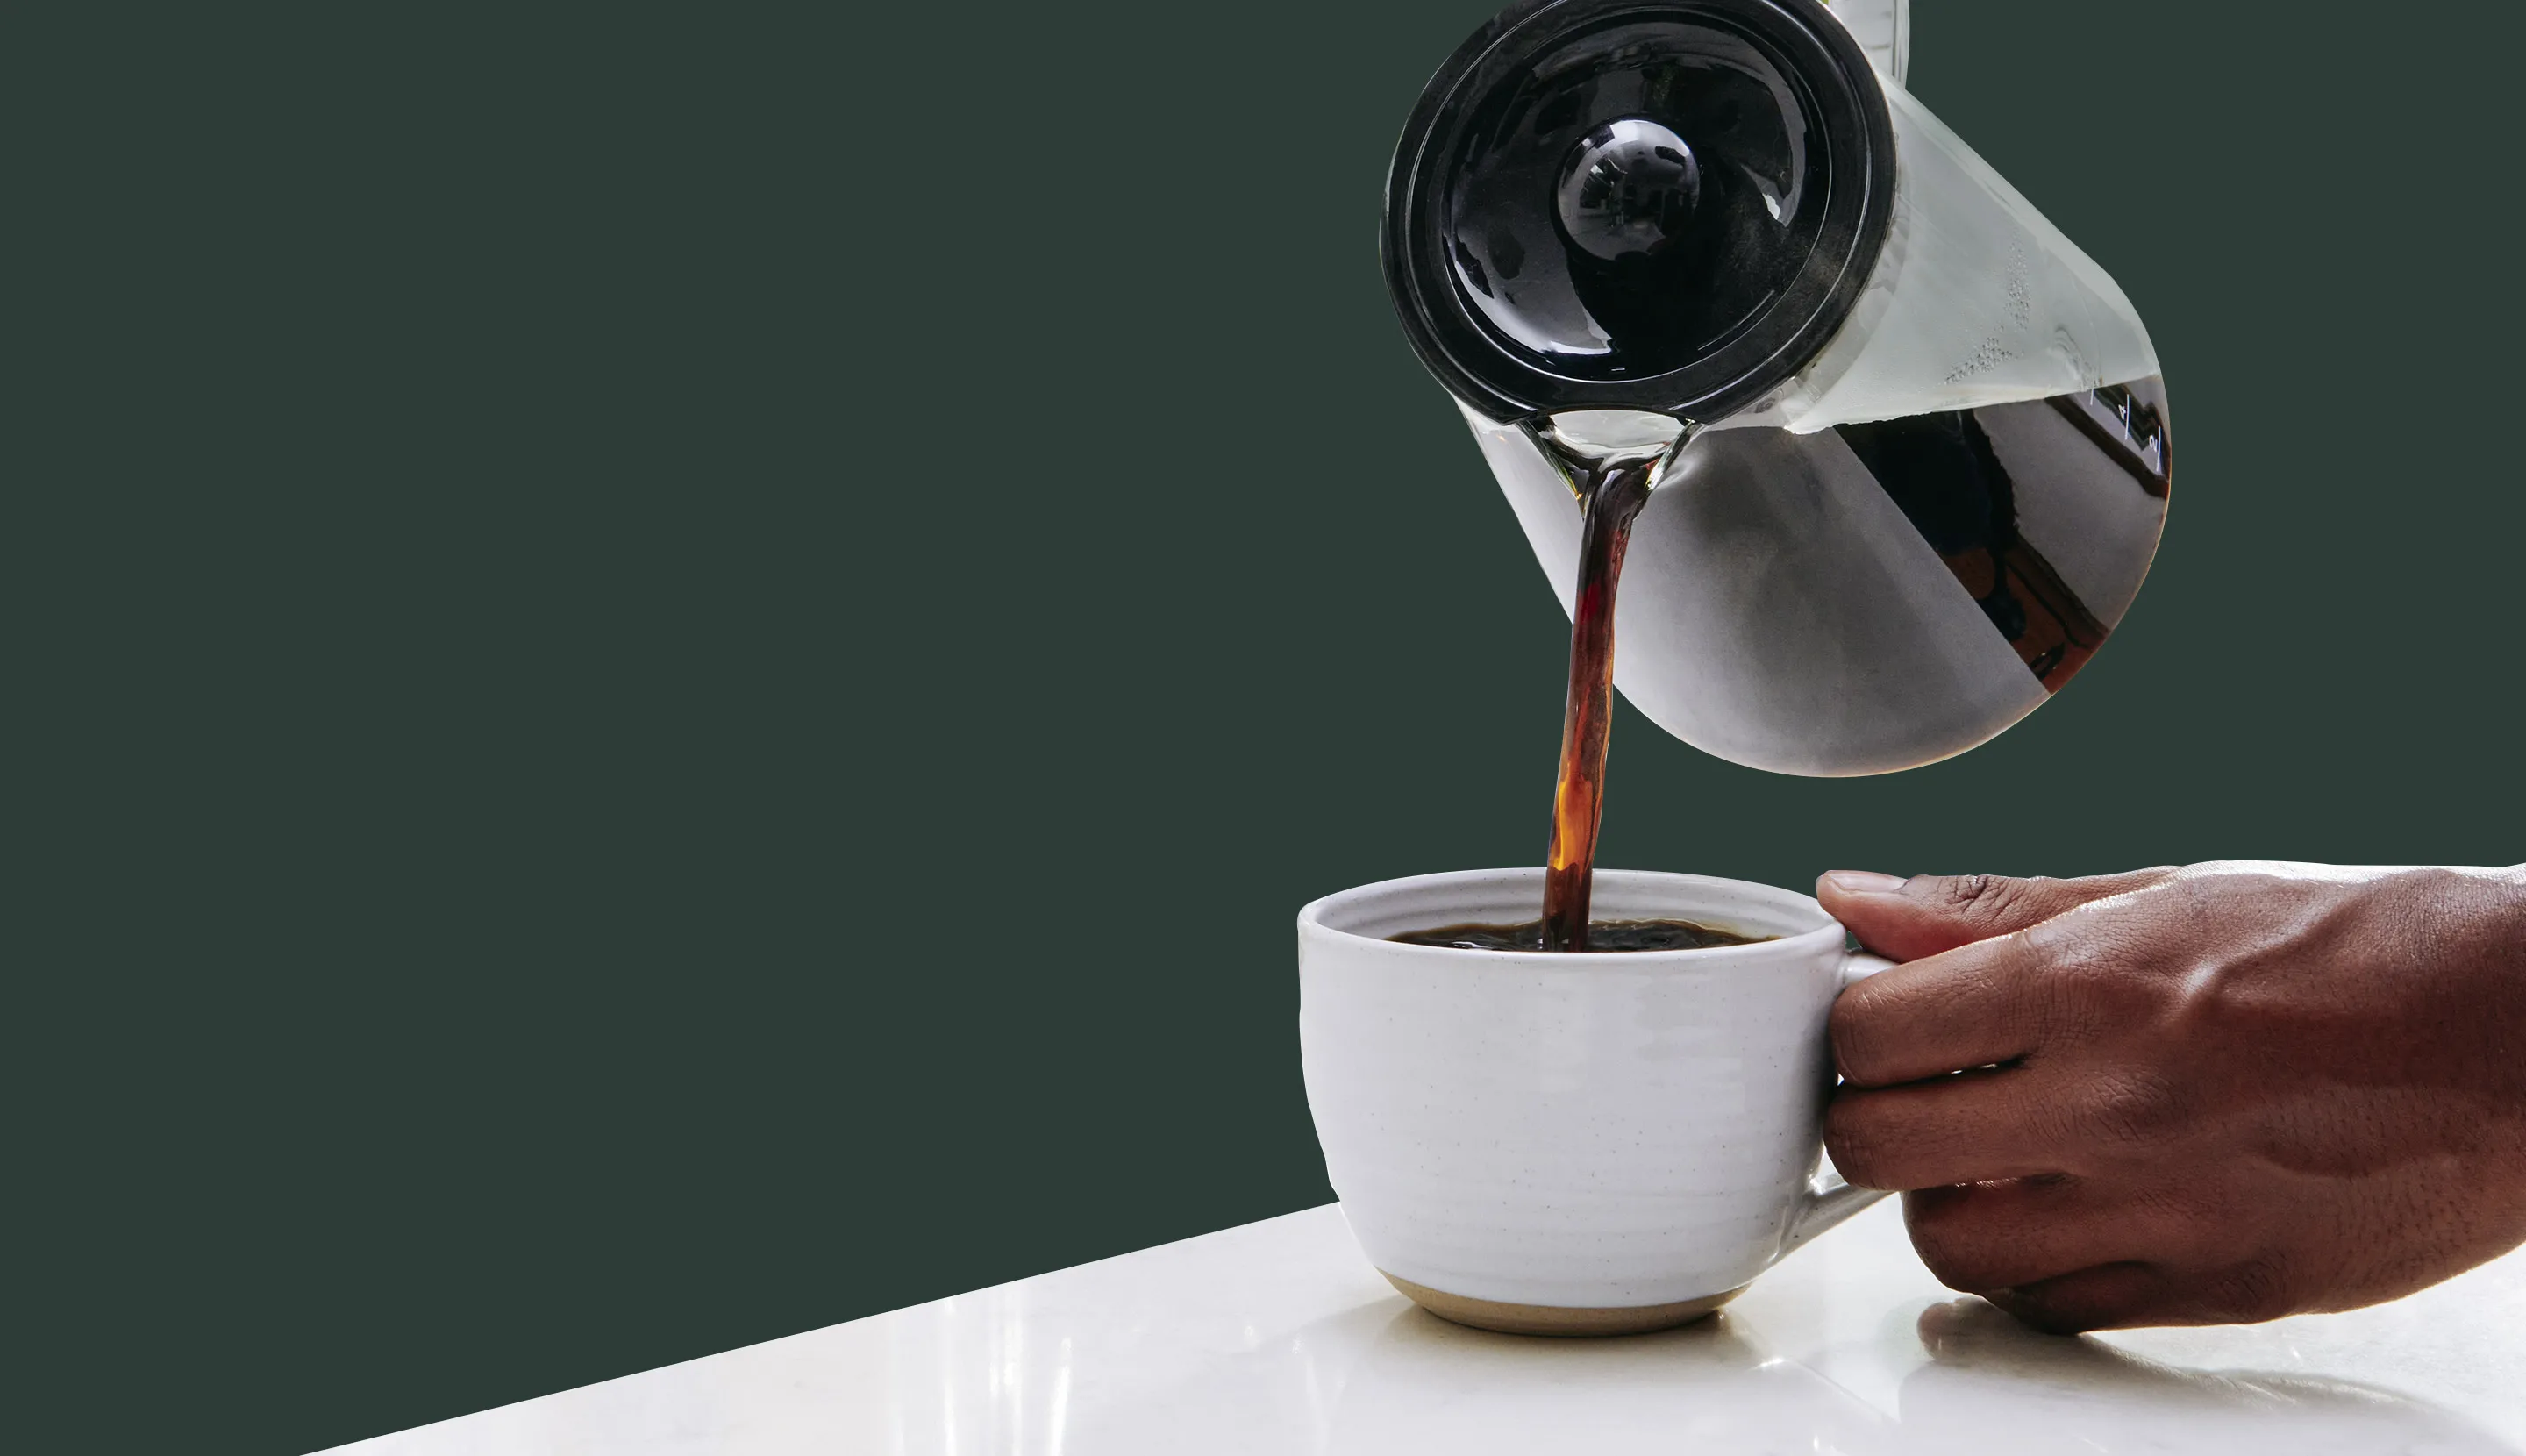 You only need two things to make the perfect cup of coffee at home: a